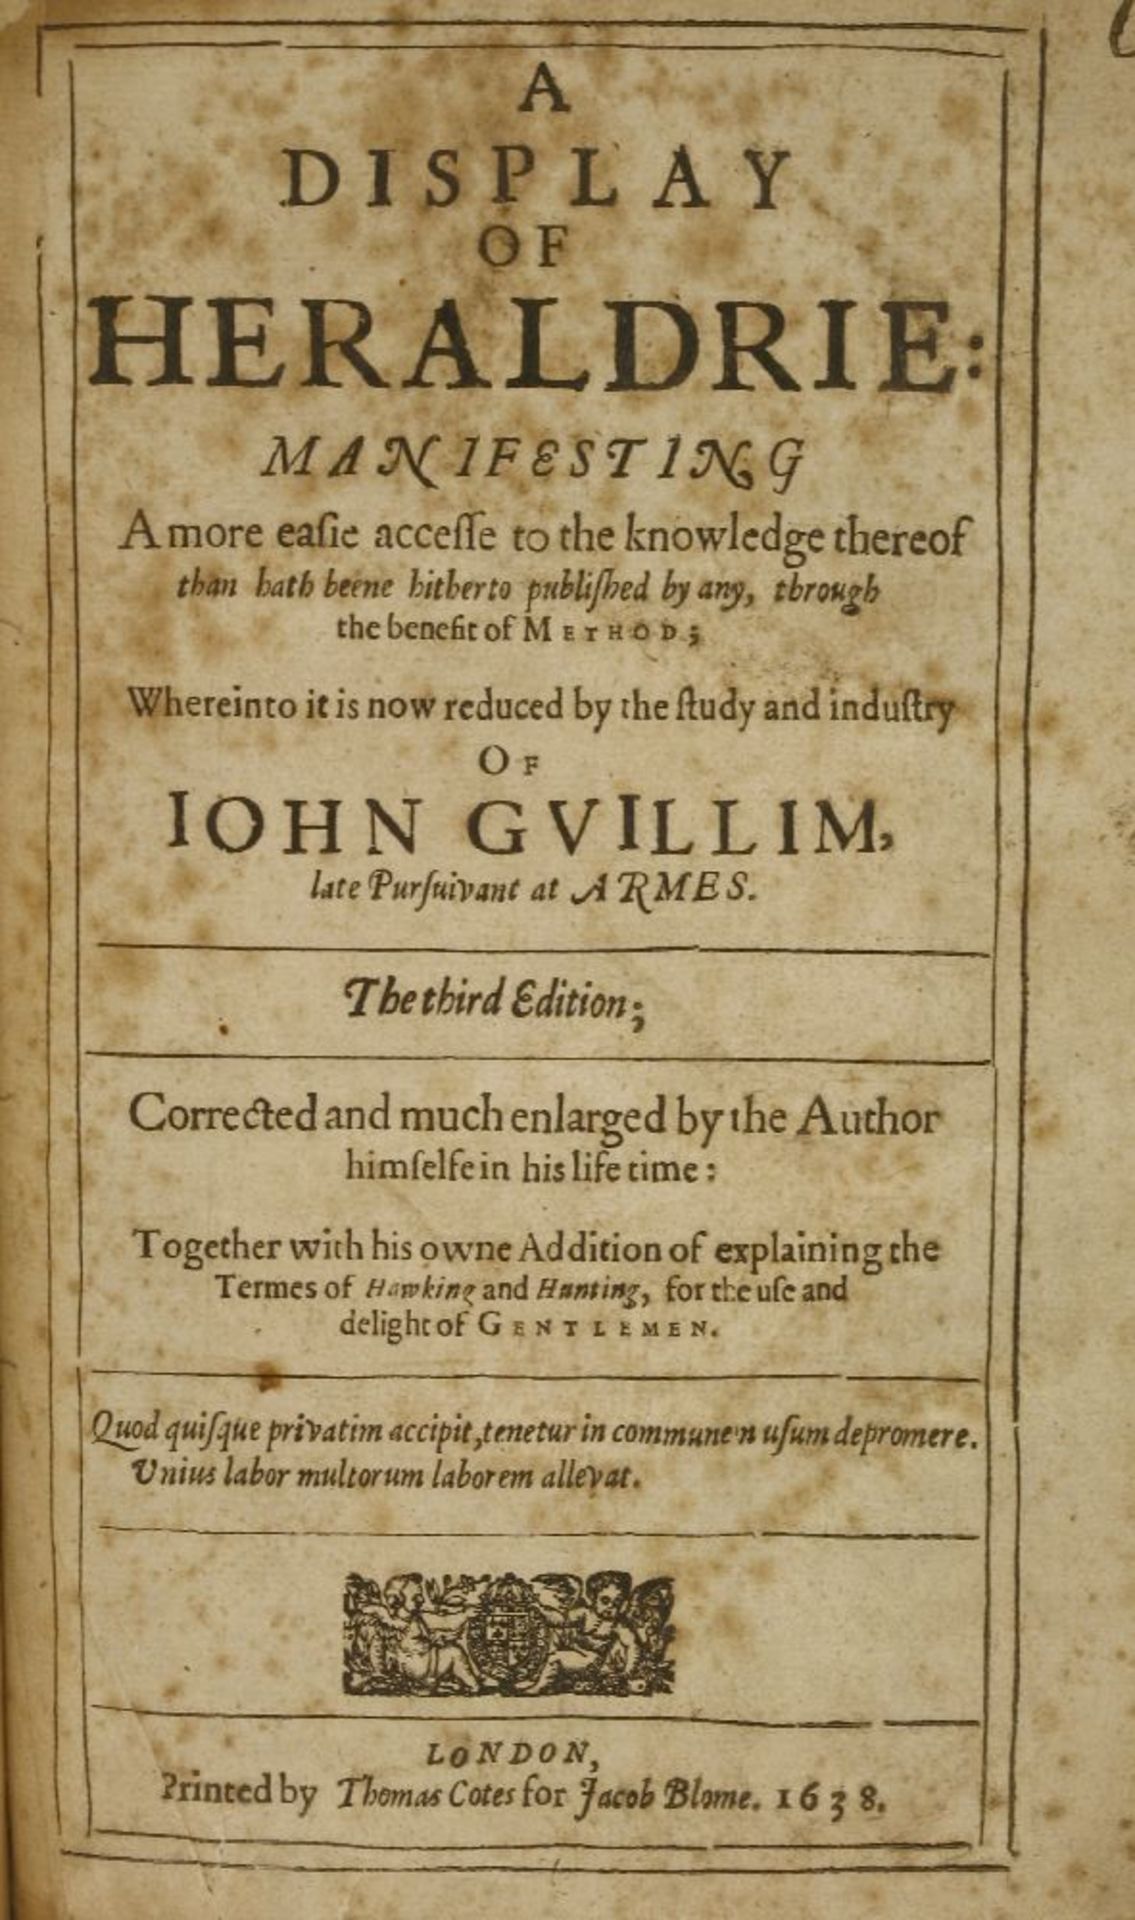 HERALDRY: GUILLIM, John: A Display of Heraldrie… Jacob Blome, 1638. With 10 full page engravings and - Image 2 of 2